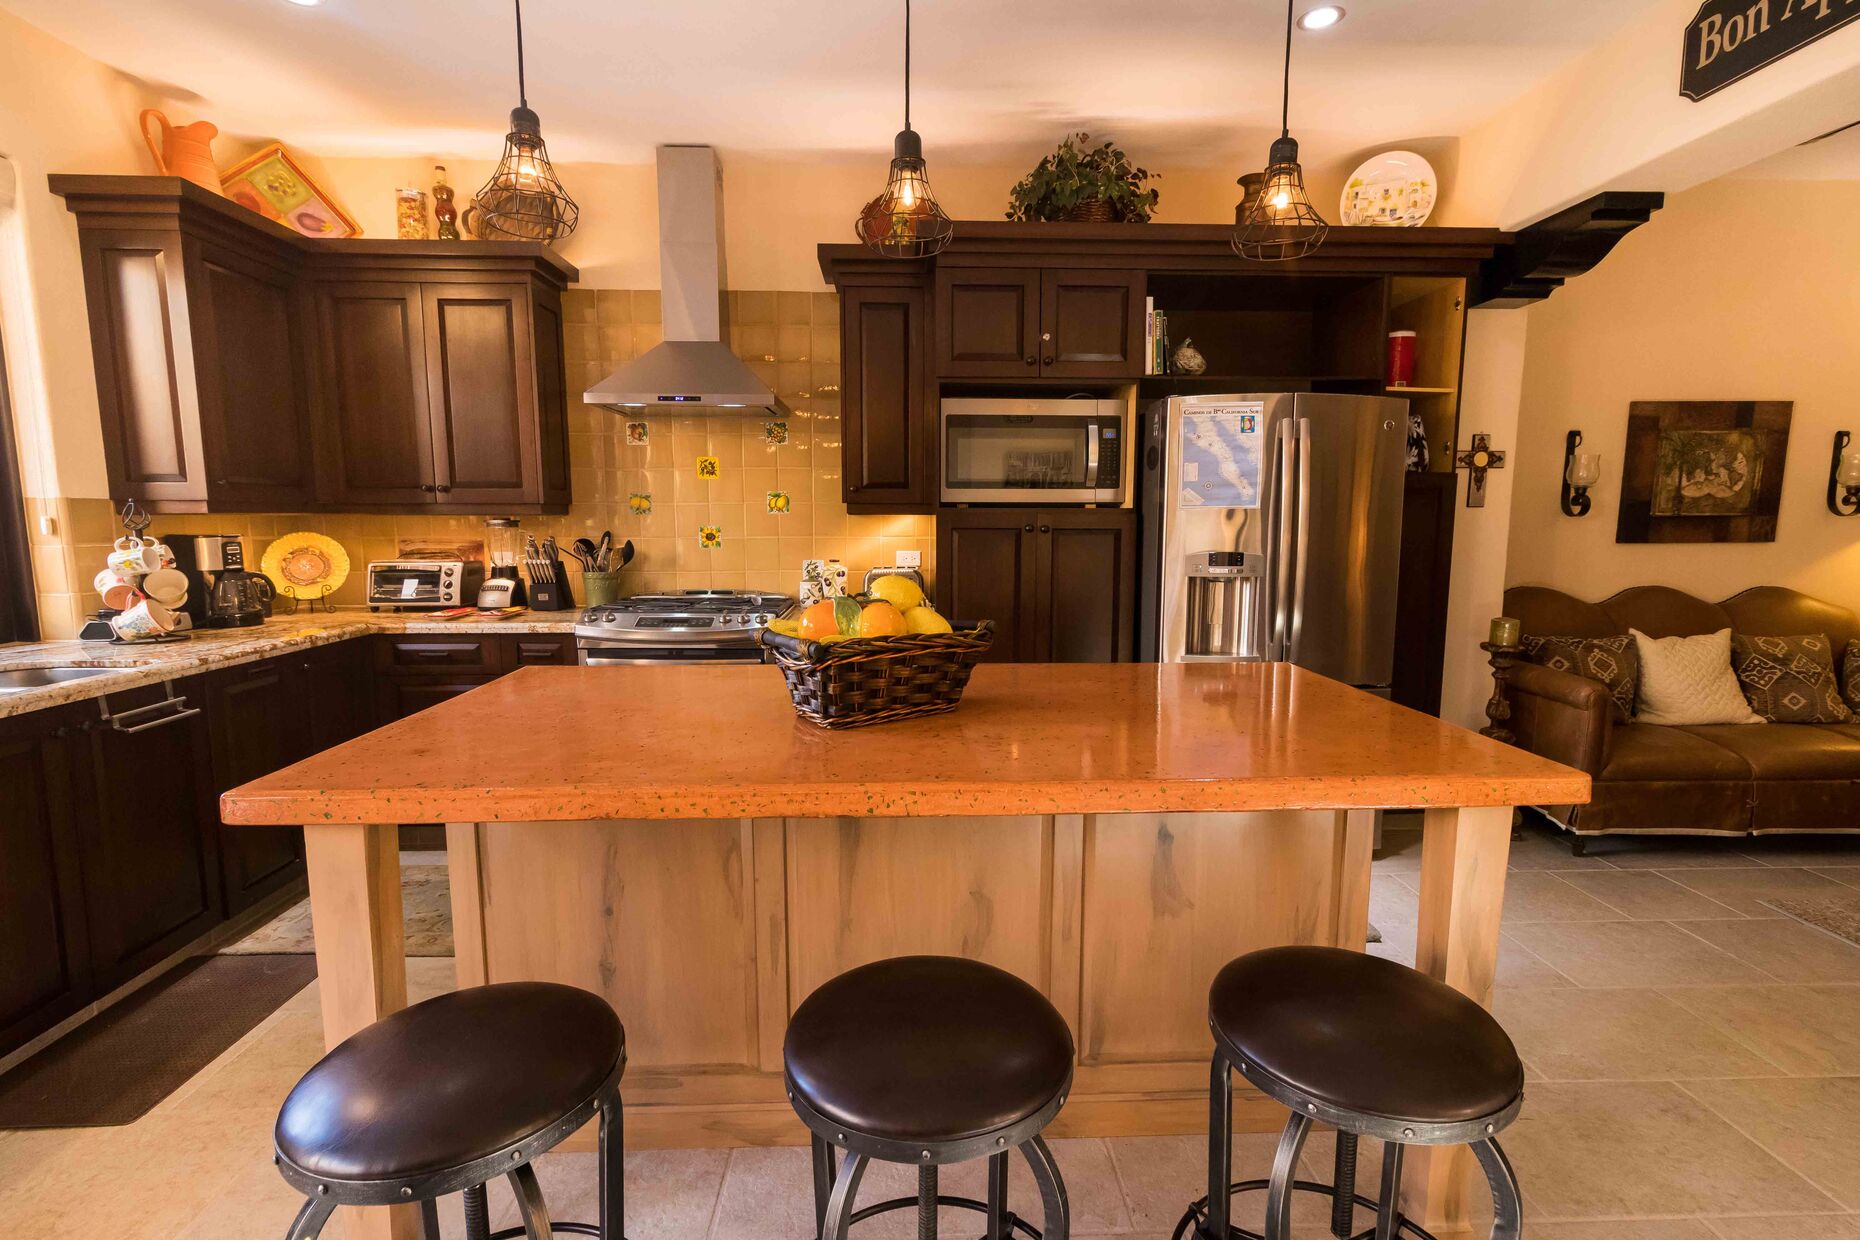 Kitchen / Granite Counter / Bar stools / Fully Equipped Kitchen